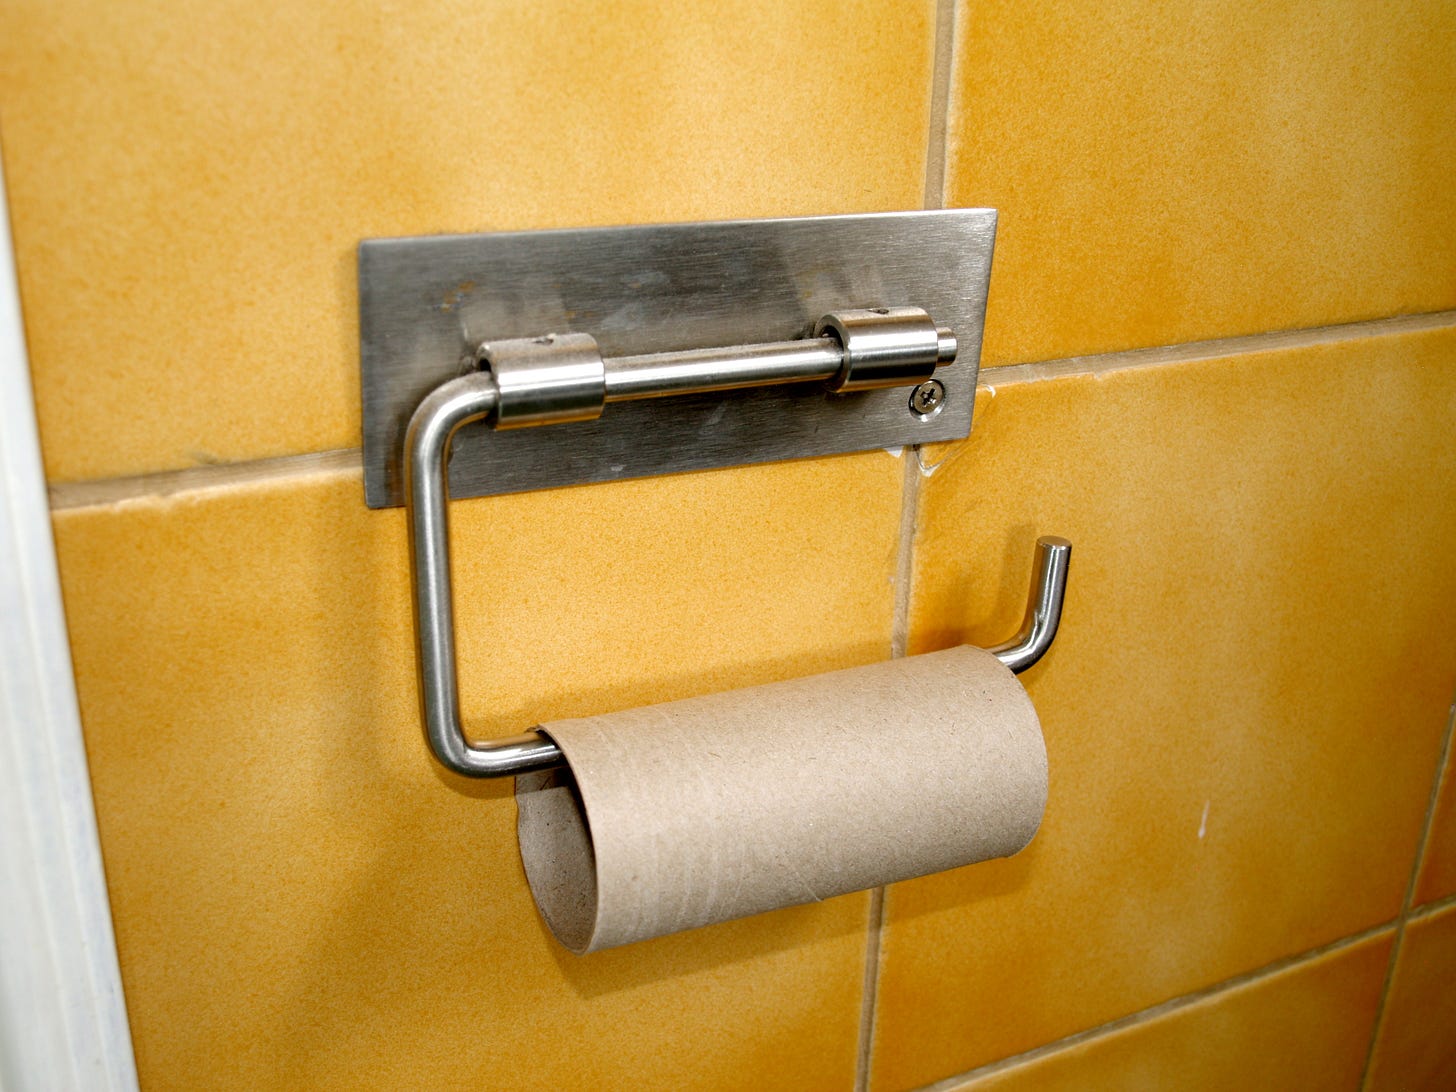 An empty toilet paper roll hanging on a holder on a tiled wall